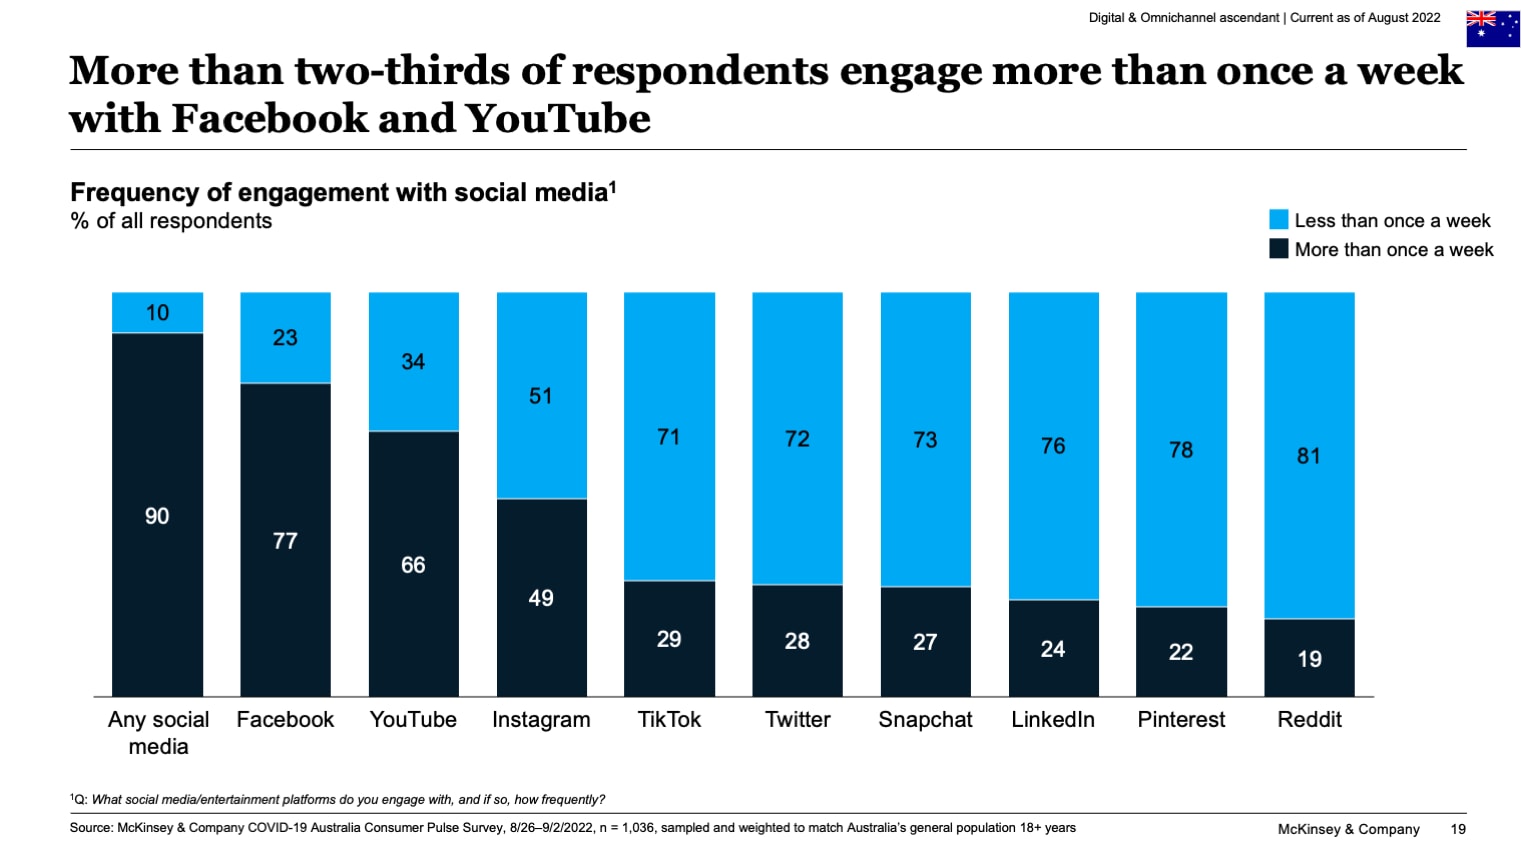 More than two-thirds of respondents engage more than once a week with Facebook and YouTube